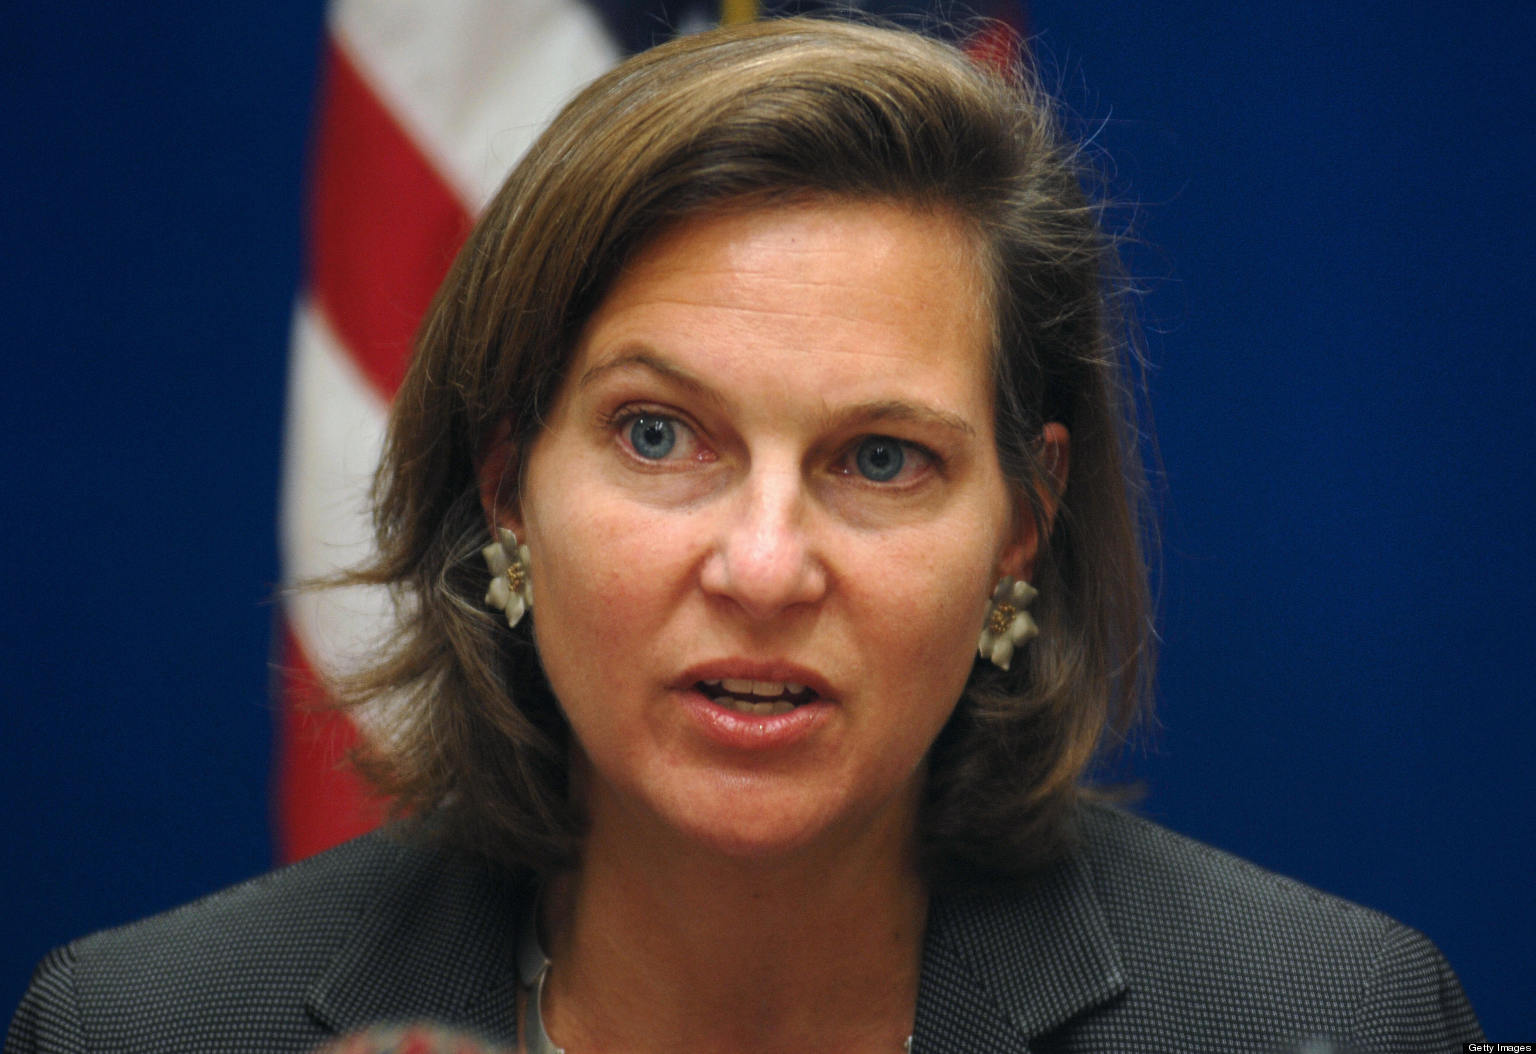 http://i.huffpost.com/gen/1156146/thumbs/o-VICTORIA-NULAND-STATE-DEPARTMENT-facebook.jpg